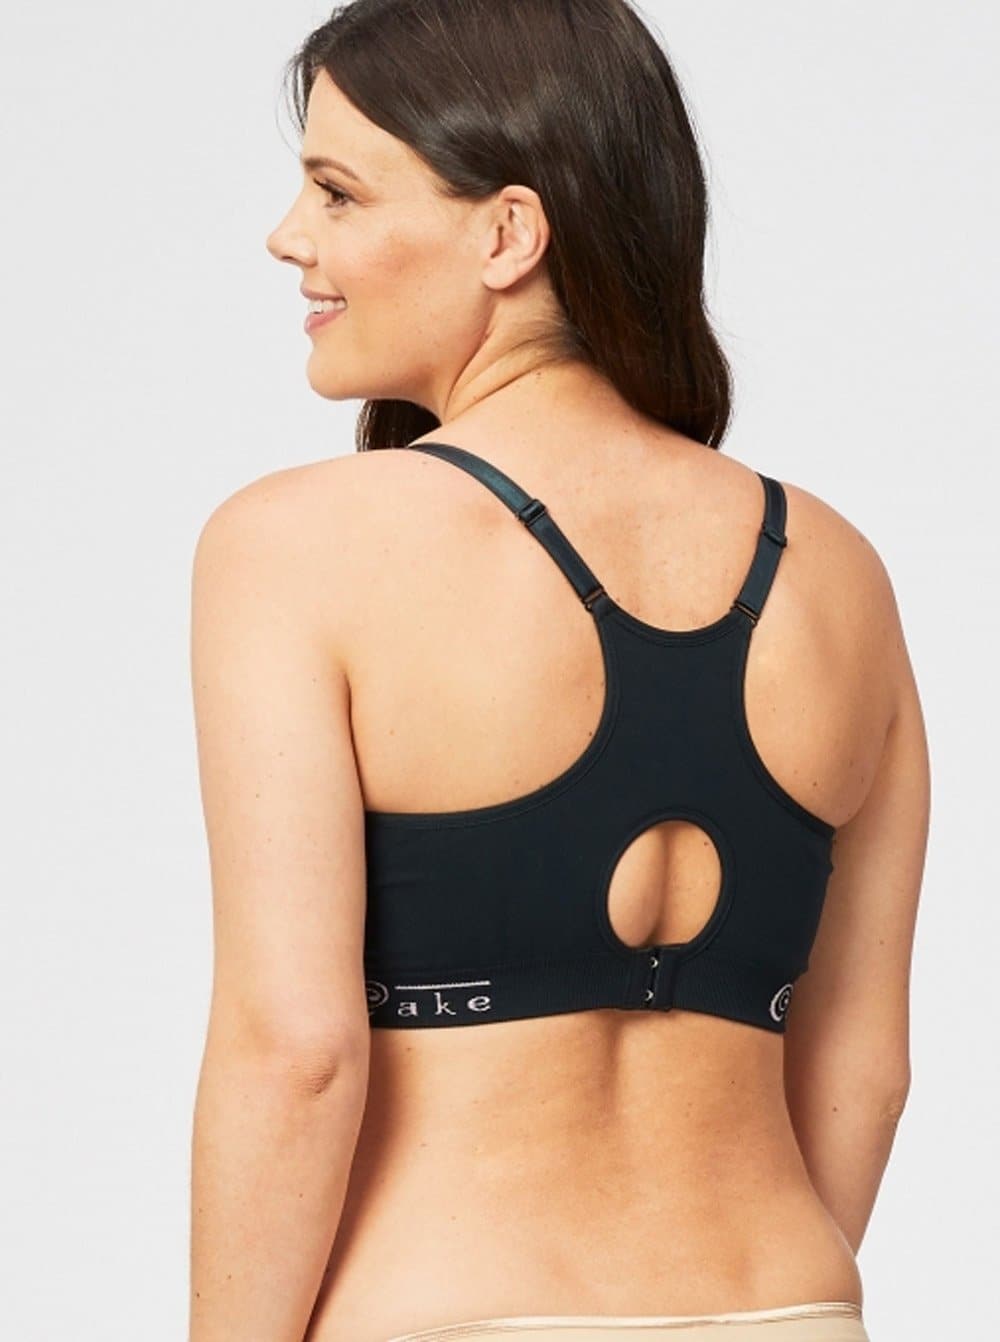 Shop Angel Women's Cotton Bras up to 90% Off